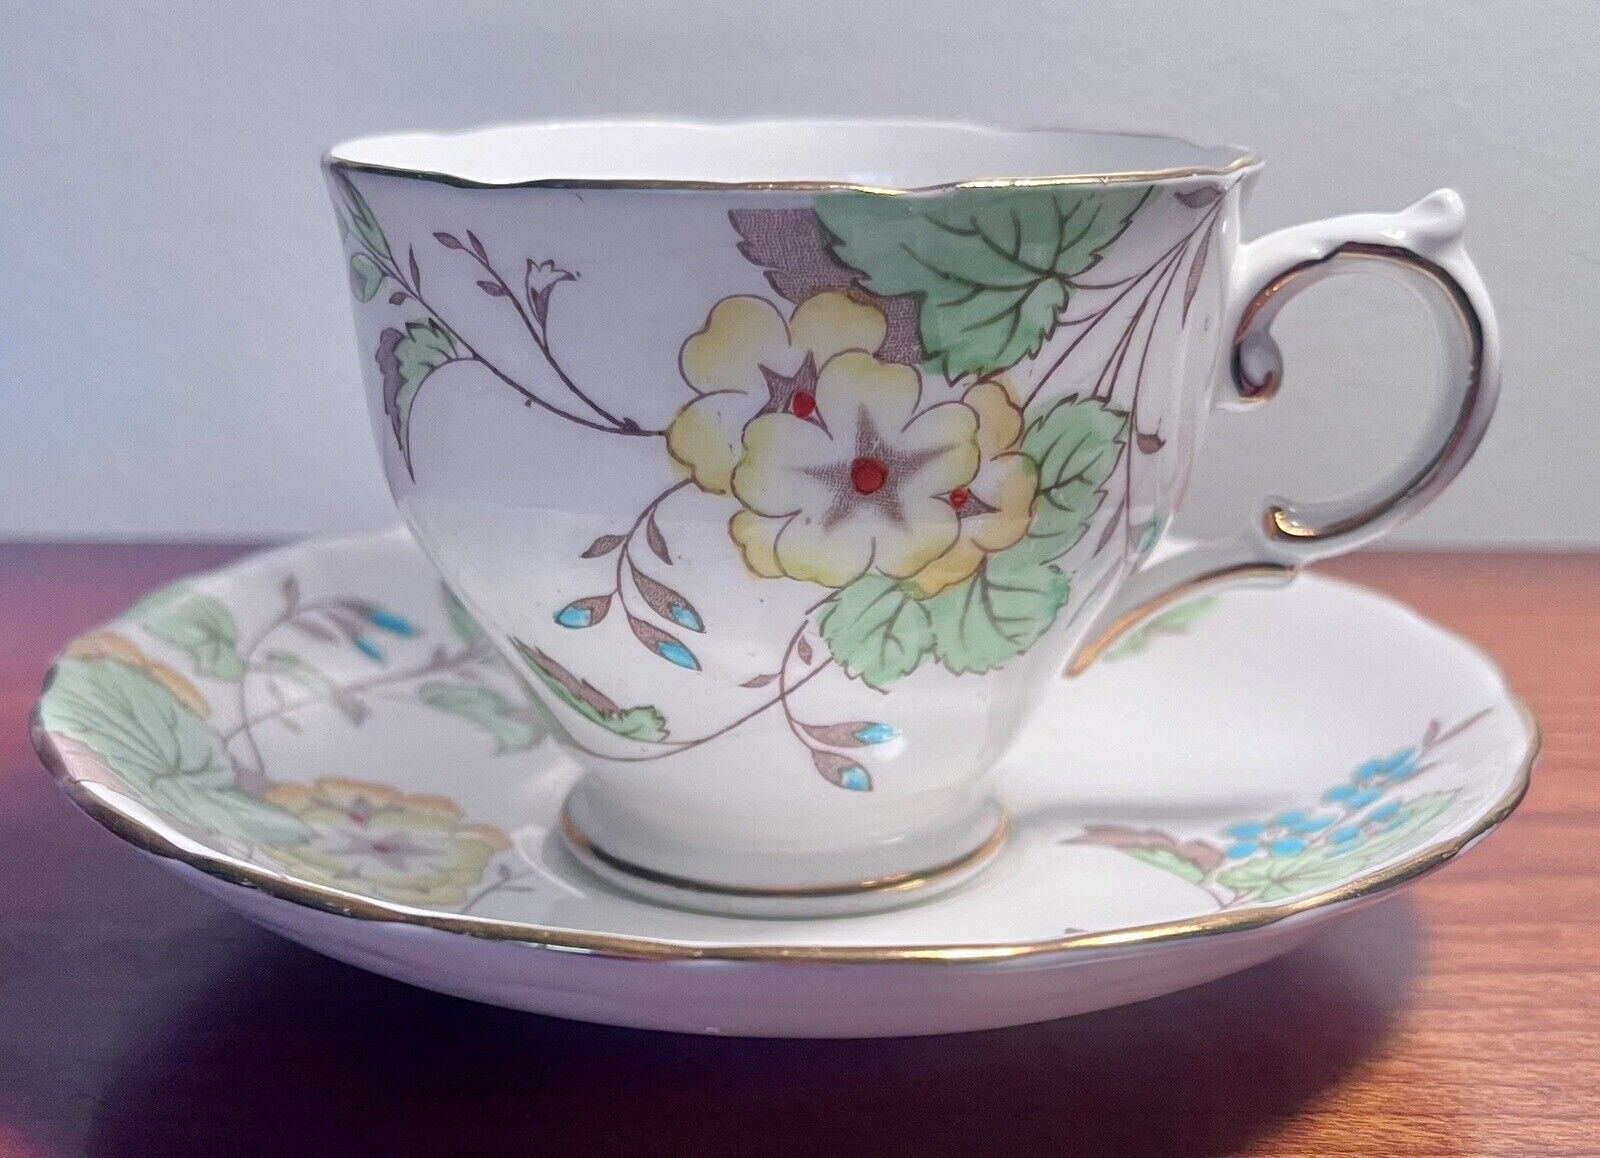 Vintage Signed & Numbered RH Plant Tuscan Fine Bone China Teacup and Saucer